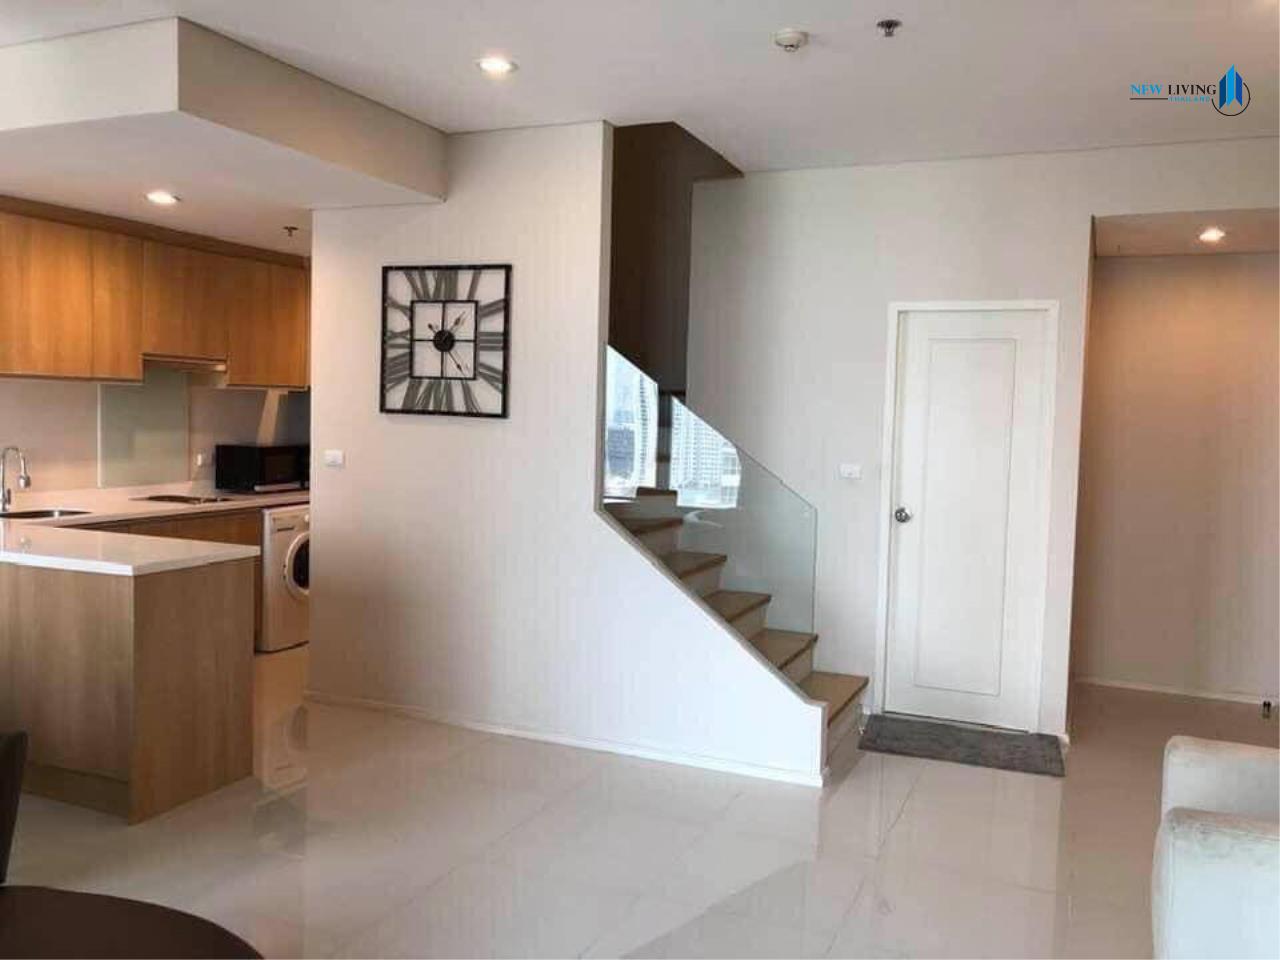 New Living Thailand Agency's *** Urgent rent !!! Villa asoke 1 bedroom Duplex 80 sq m, fully furnished, beautiful room, ready to move in **** 5